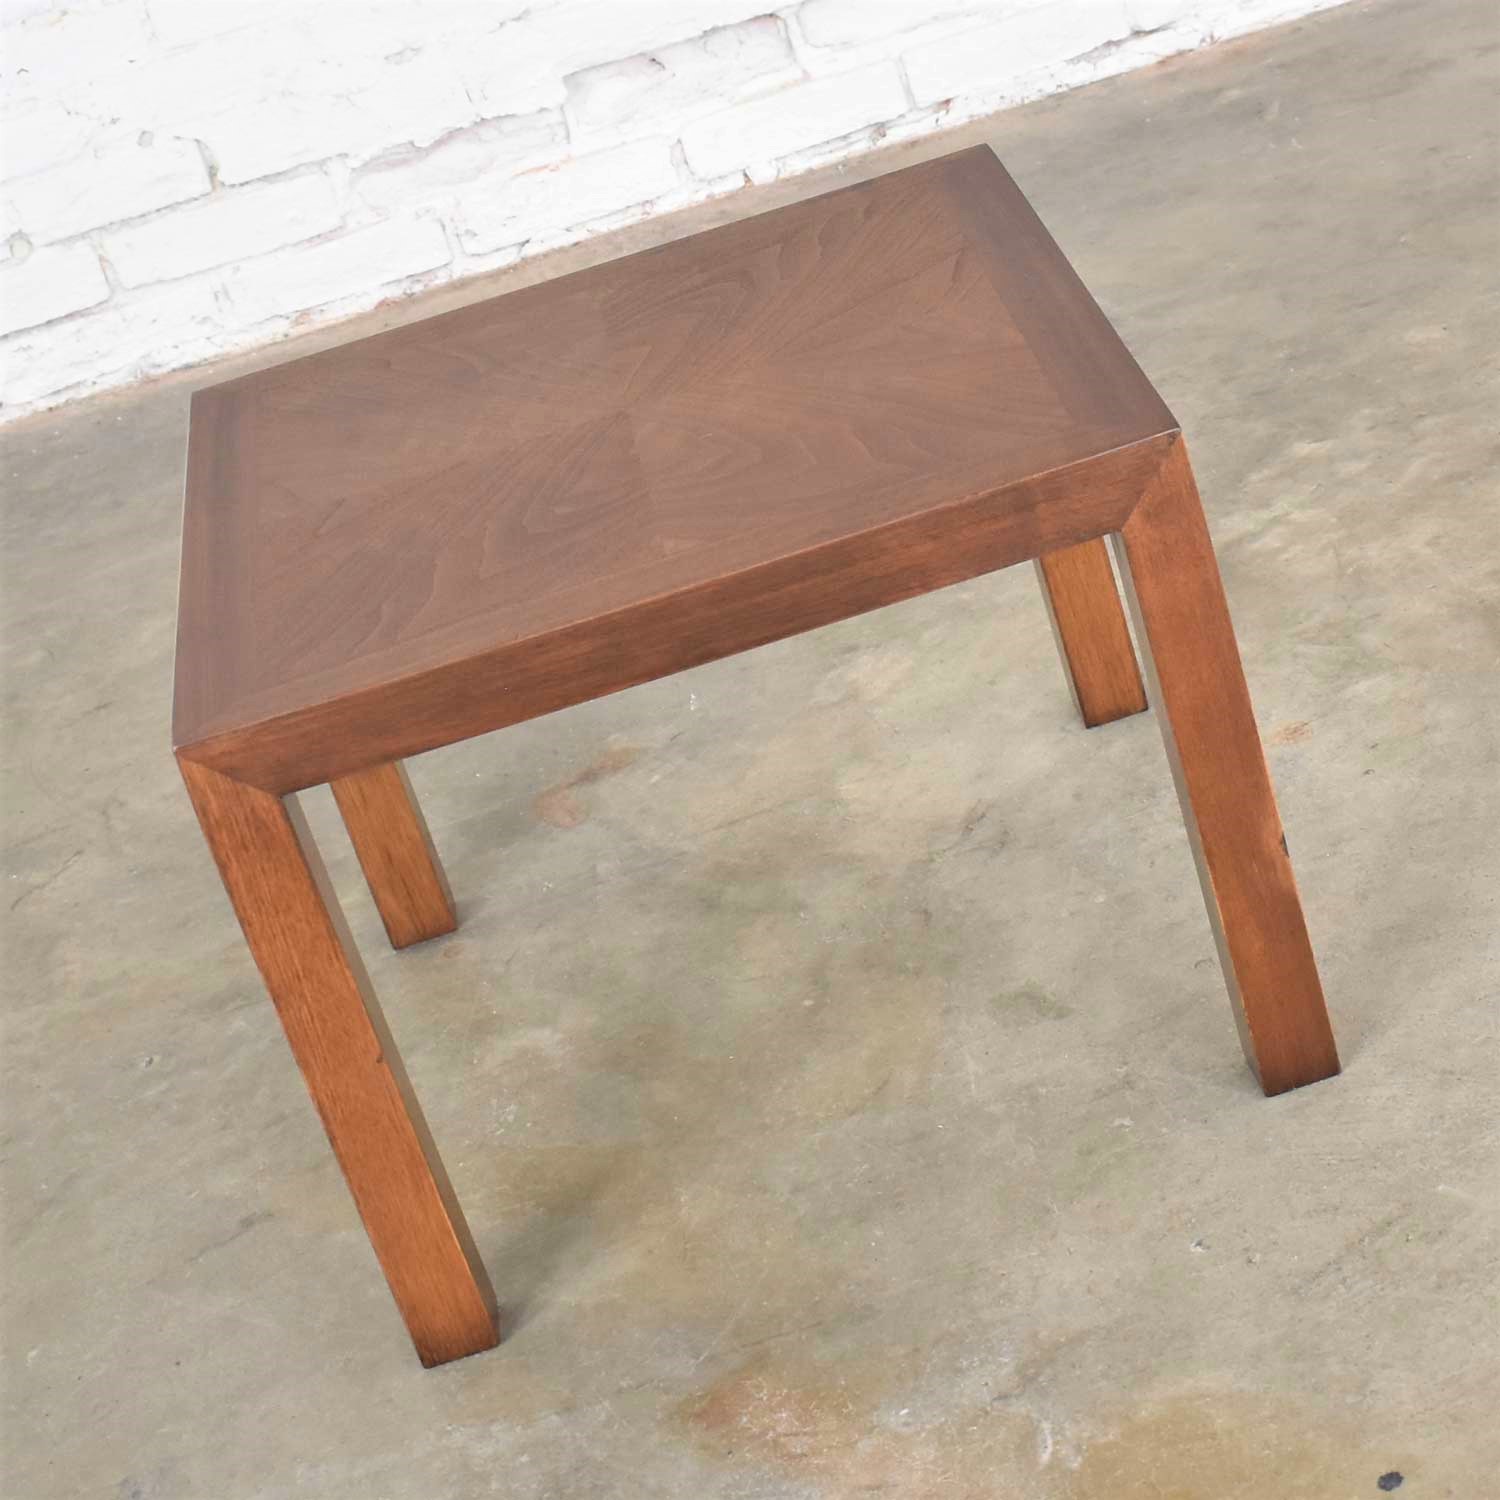 Vintage Modern Lane Solid Walnut Square Parsons Side Table w/ Inlay Style #1124-18 1970